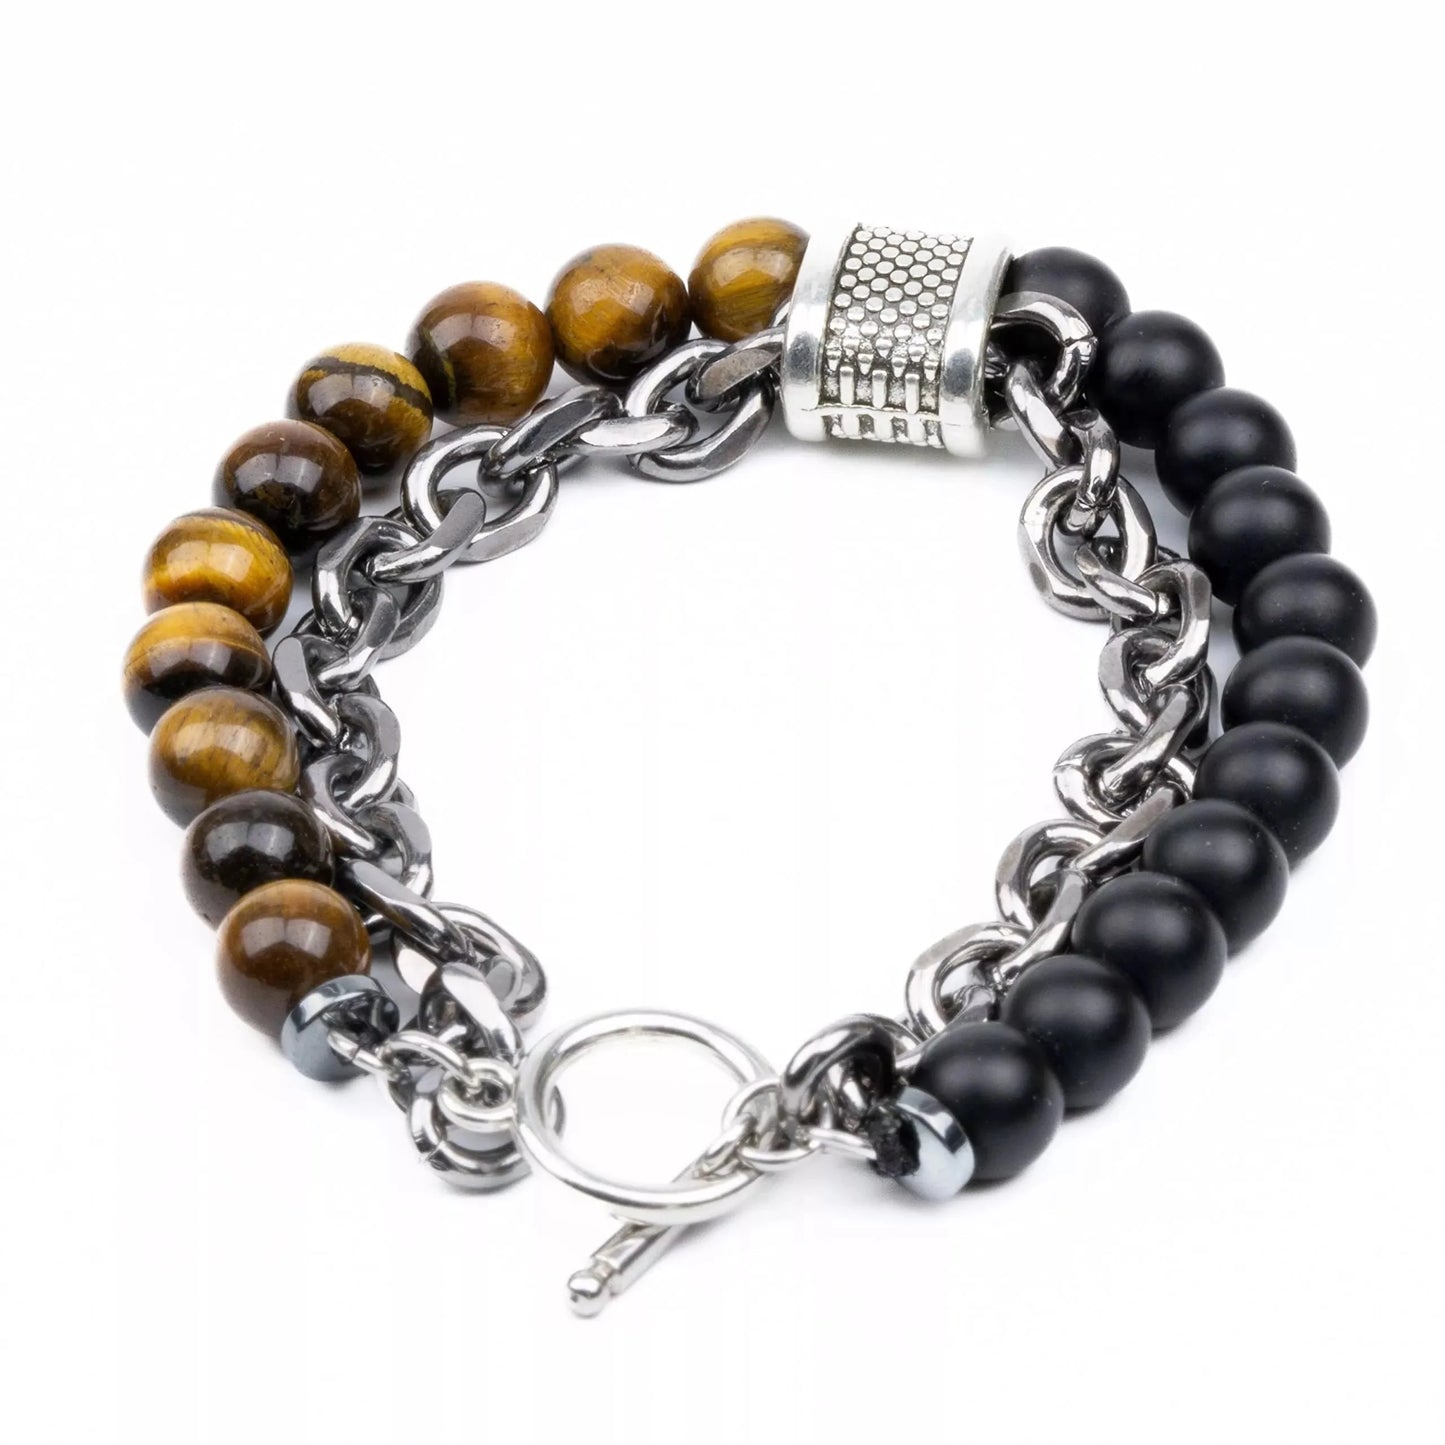 THE MEN THING Natural Beads Bracelet for Men - Become Money Magnet - Black Tiger Eye Stone Colorful 7 Chakra Energy Stretch Bracelet (8inch)